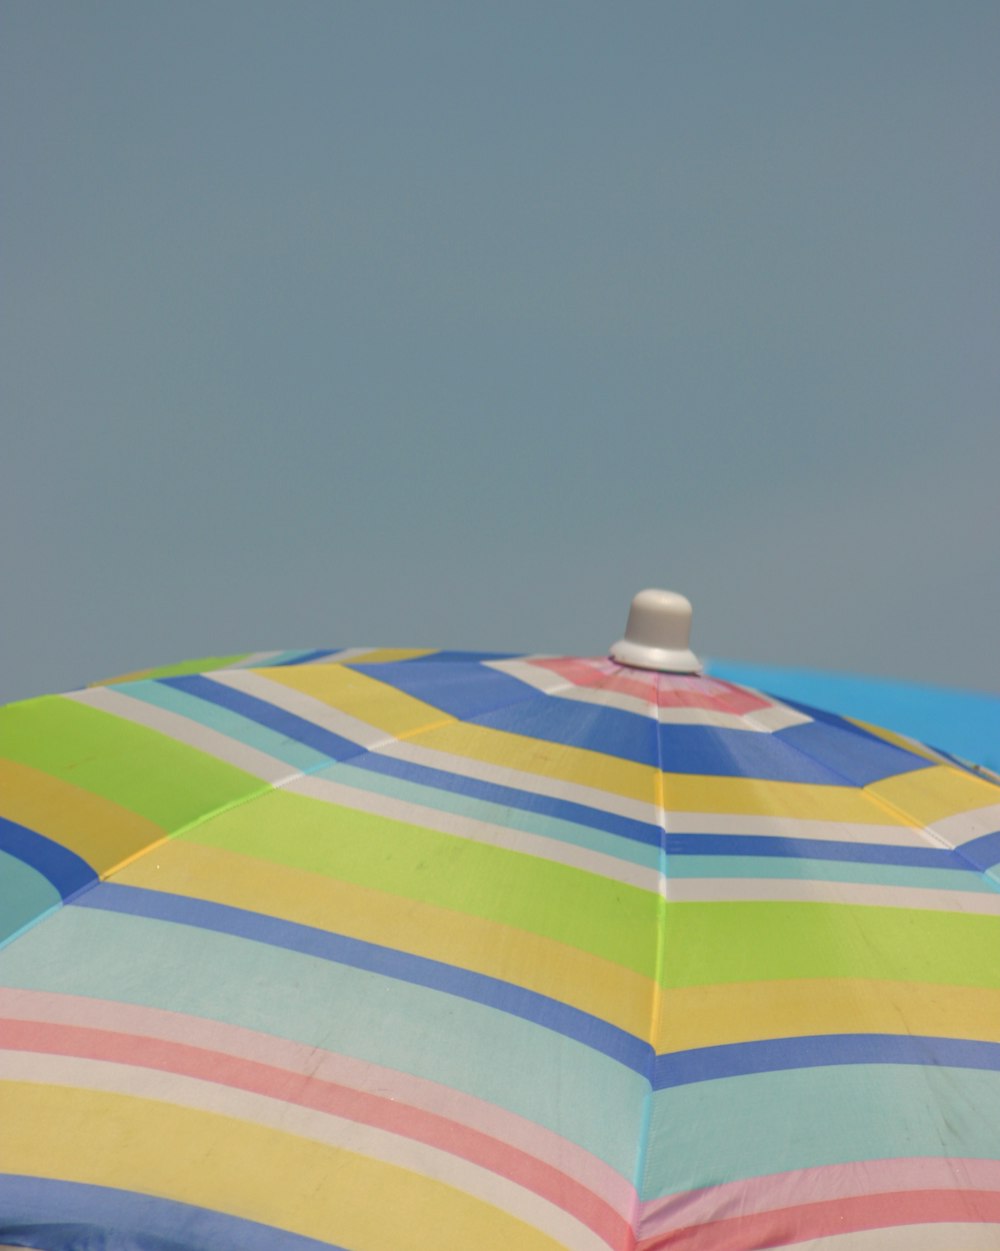 a colorful umbrella with a light on top